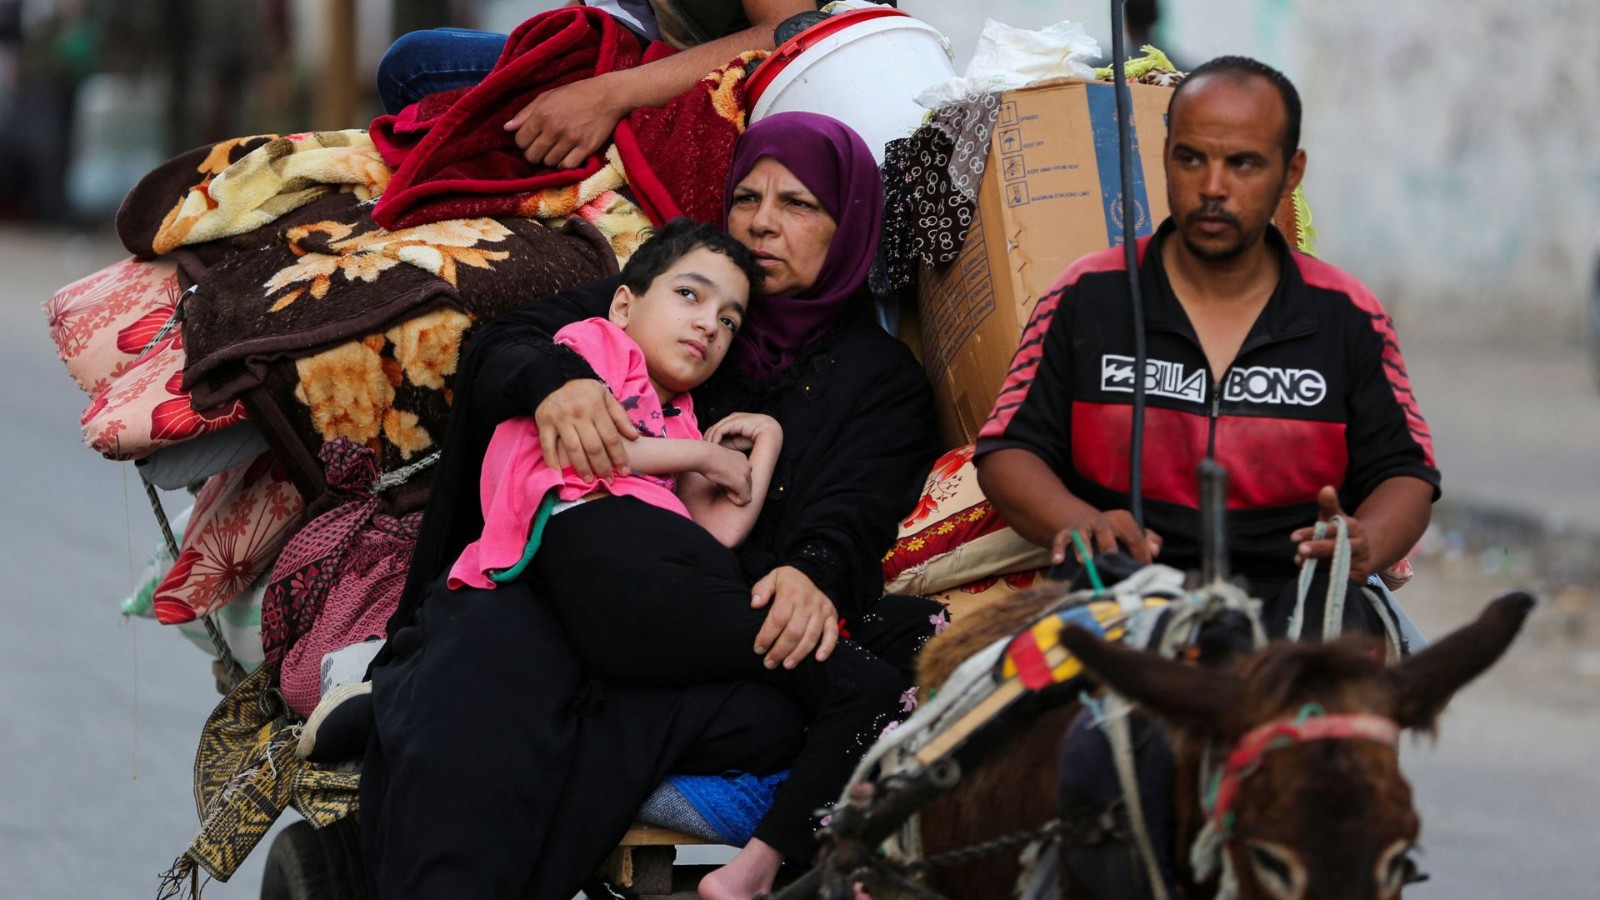 Palestinians travel in a donkey-drawn cart loaded with their belongings as they flee Rafah due to an Israeli military operation, in Rafah. /Hatem Khaled/Reuters